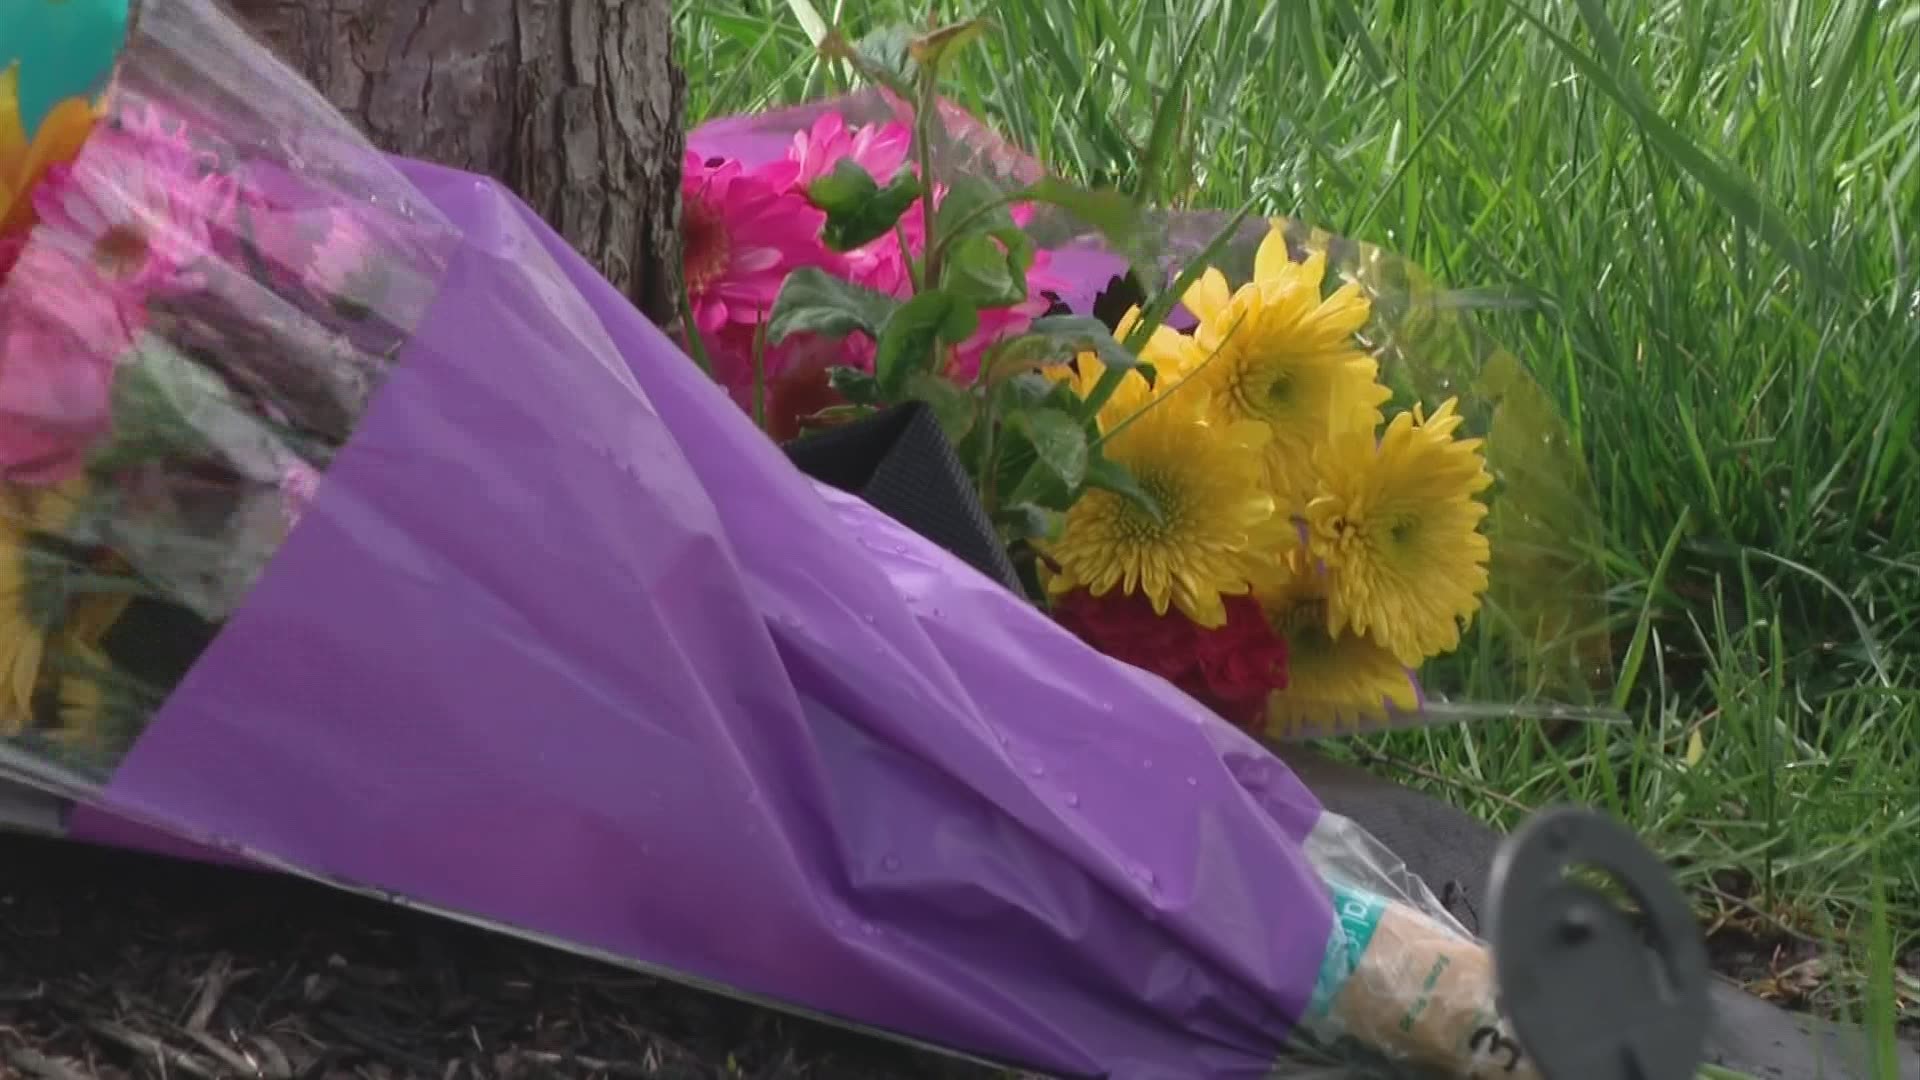 A memorial grows near the location where Ma'Khia Bryant was shot and killed by a Columbus Police officer.